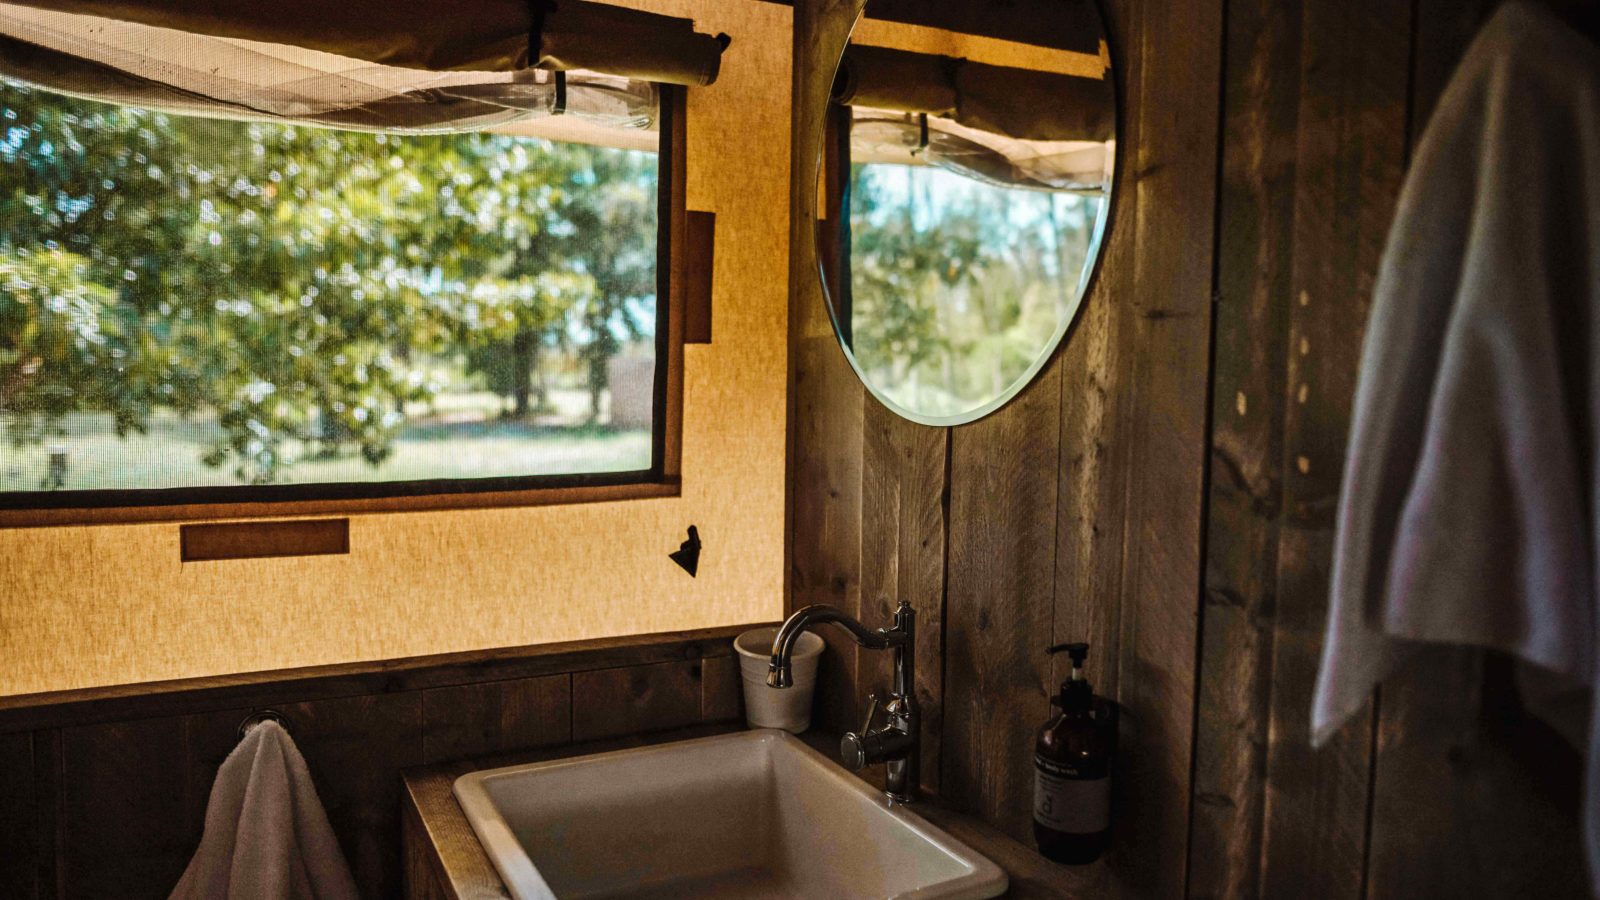 Myall River Camp's glamping tents and tiny houses (photos by @wanderingdonut)